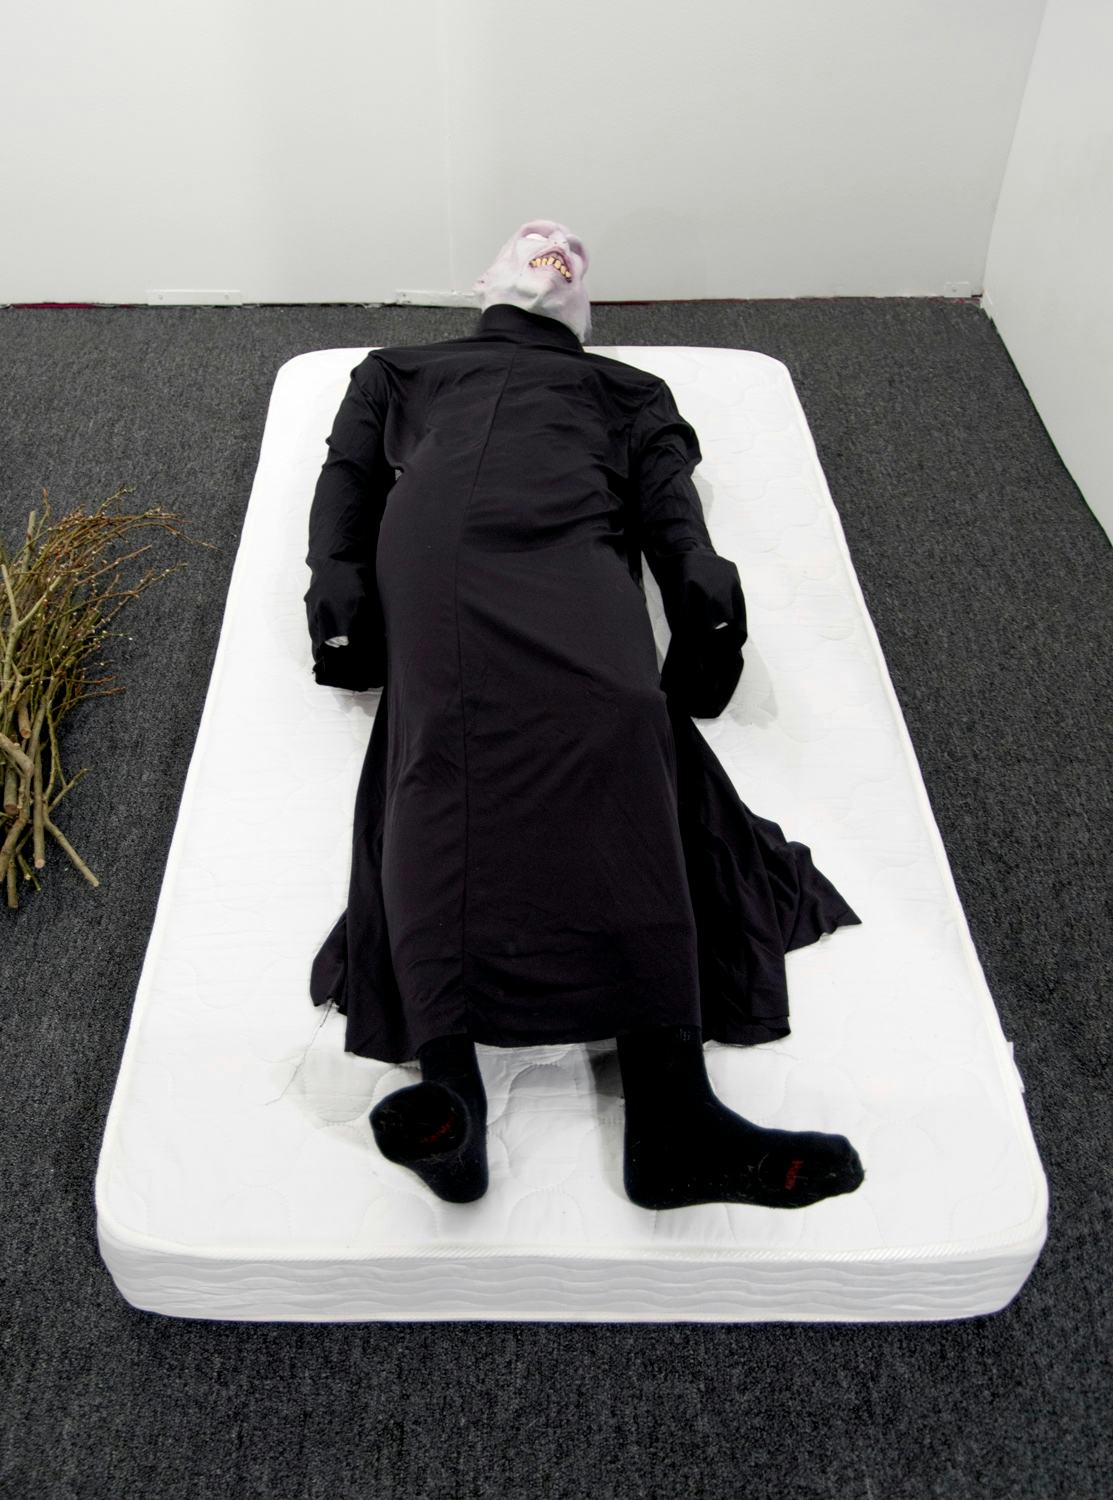 He who shall not be named on Advil PM (mattress edition) , 2017
Voldemort costume, mannequin or performer, Advil PM, twin mattress
Unique